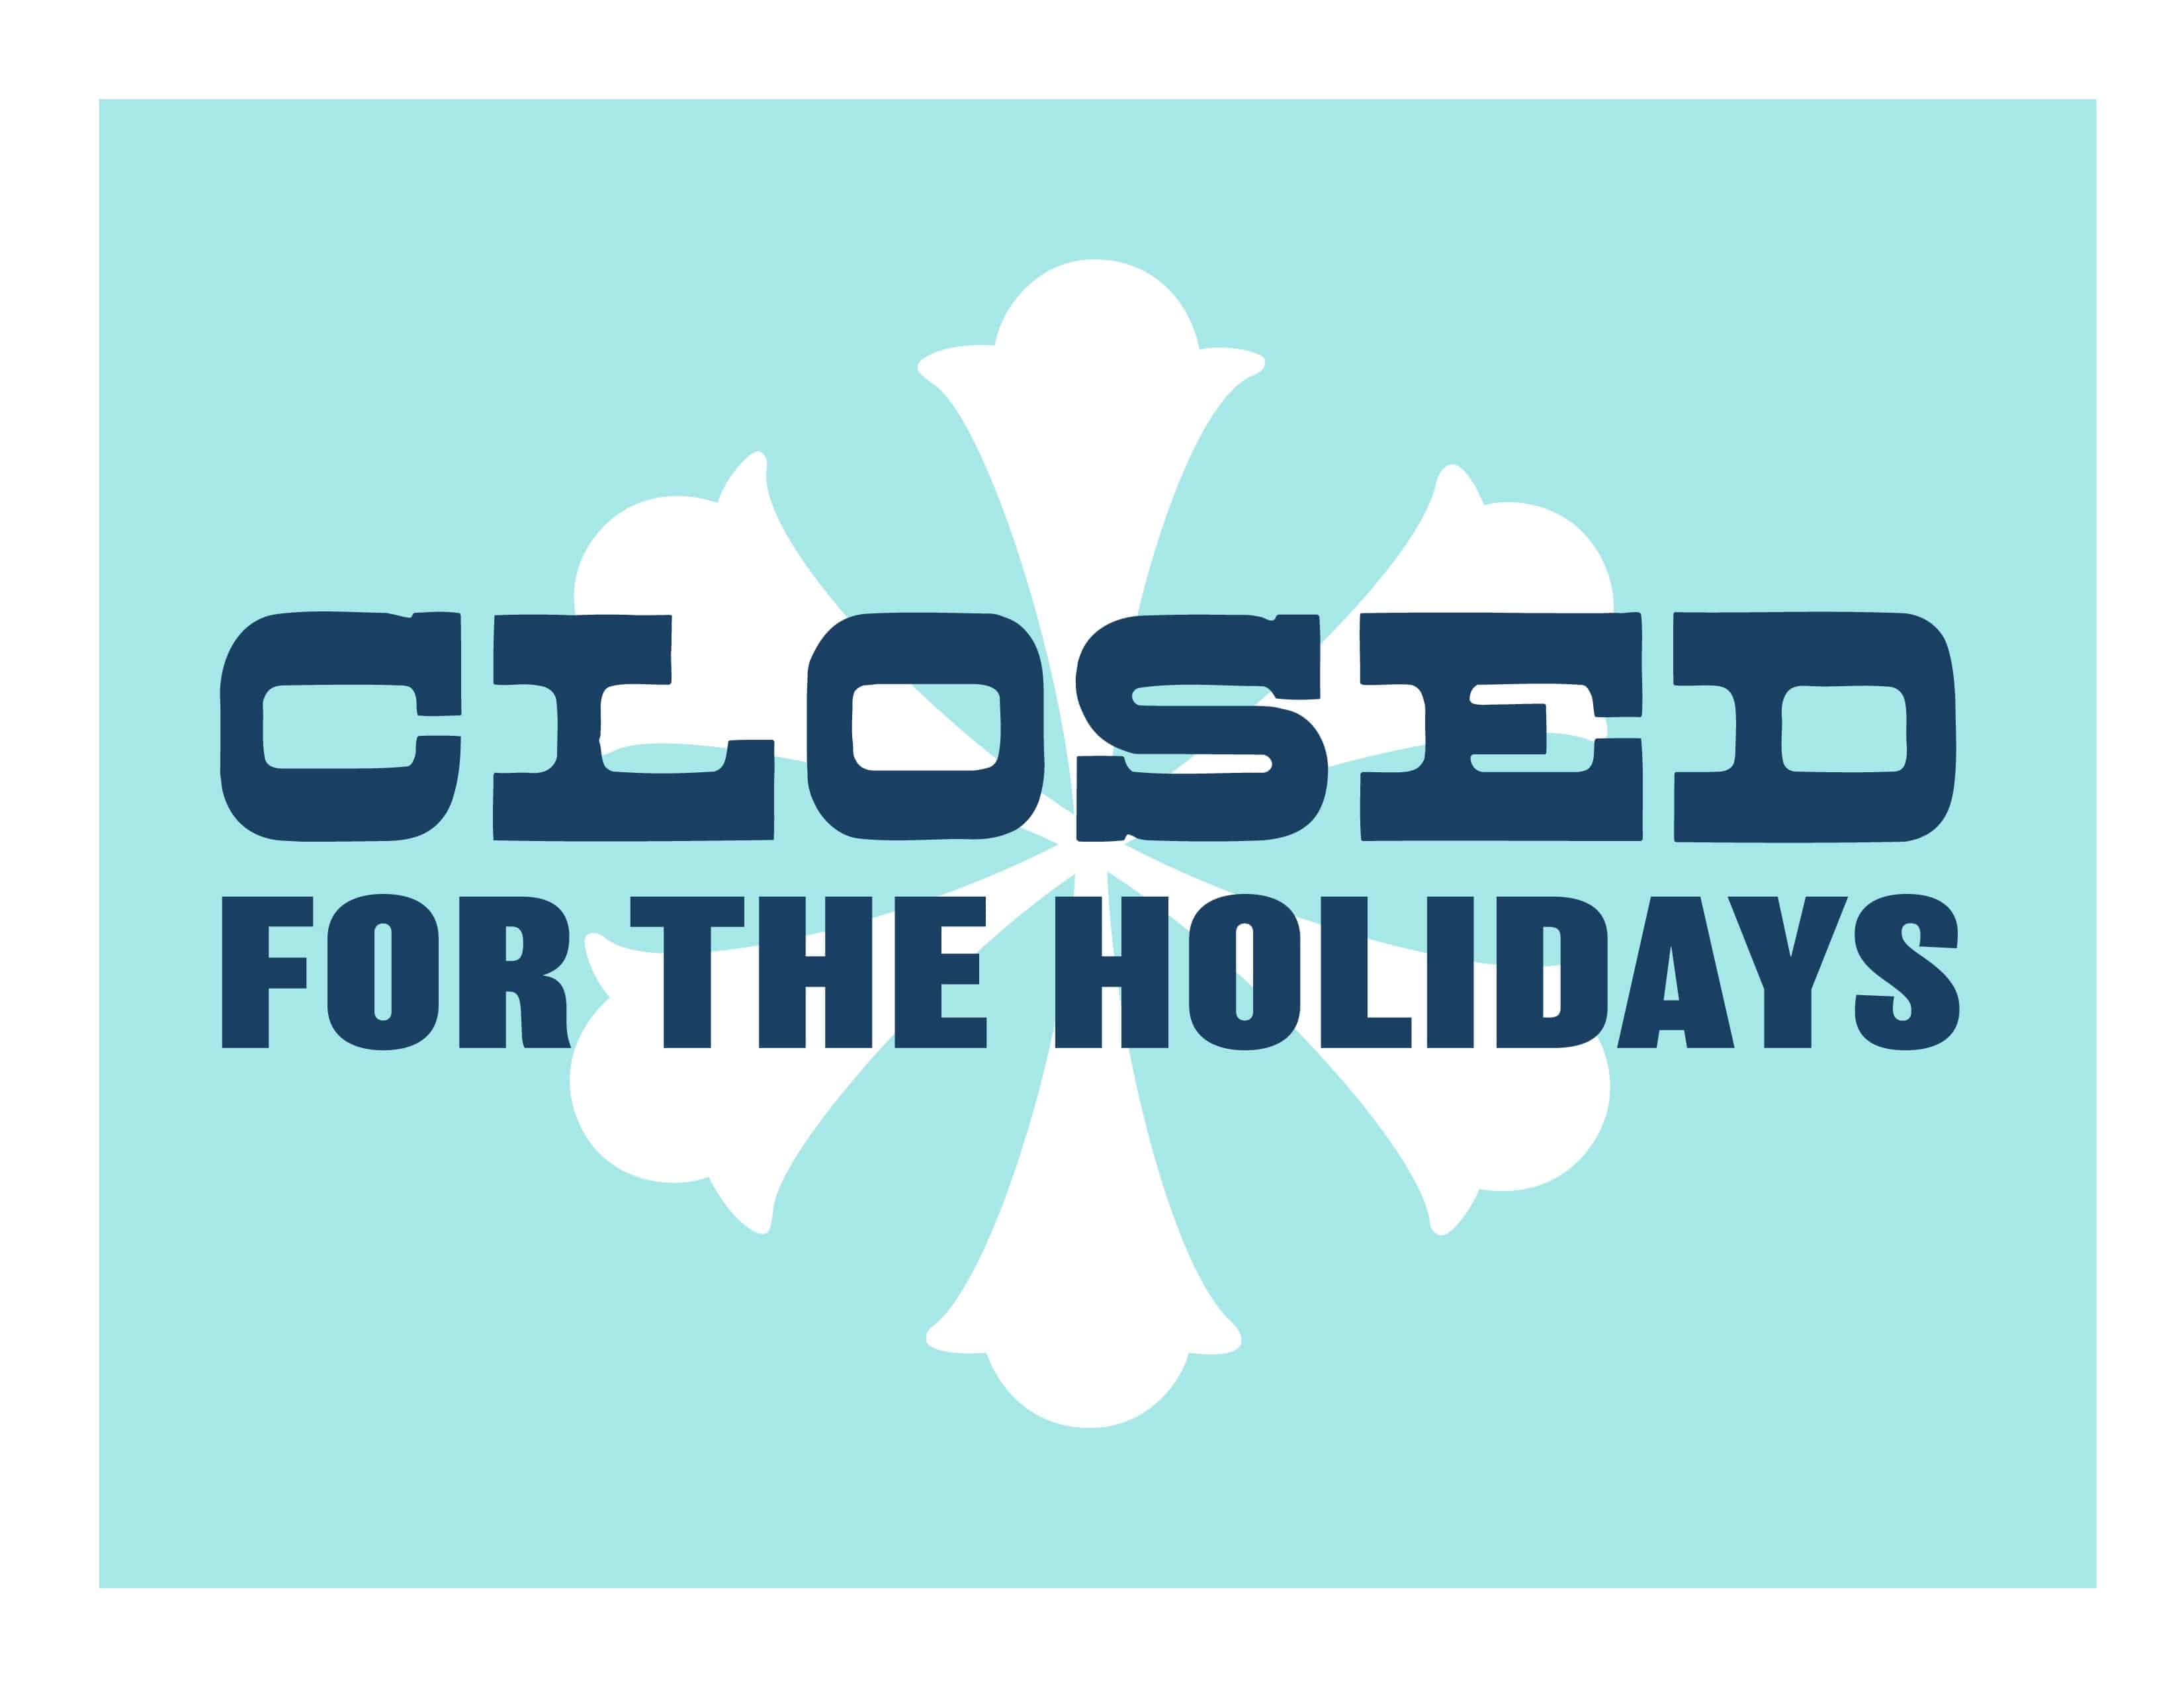 closed sign saying "closed for the holidays" and one large snowflake in the background